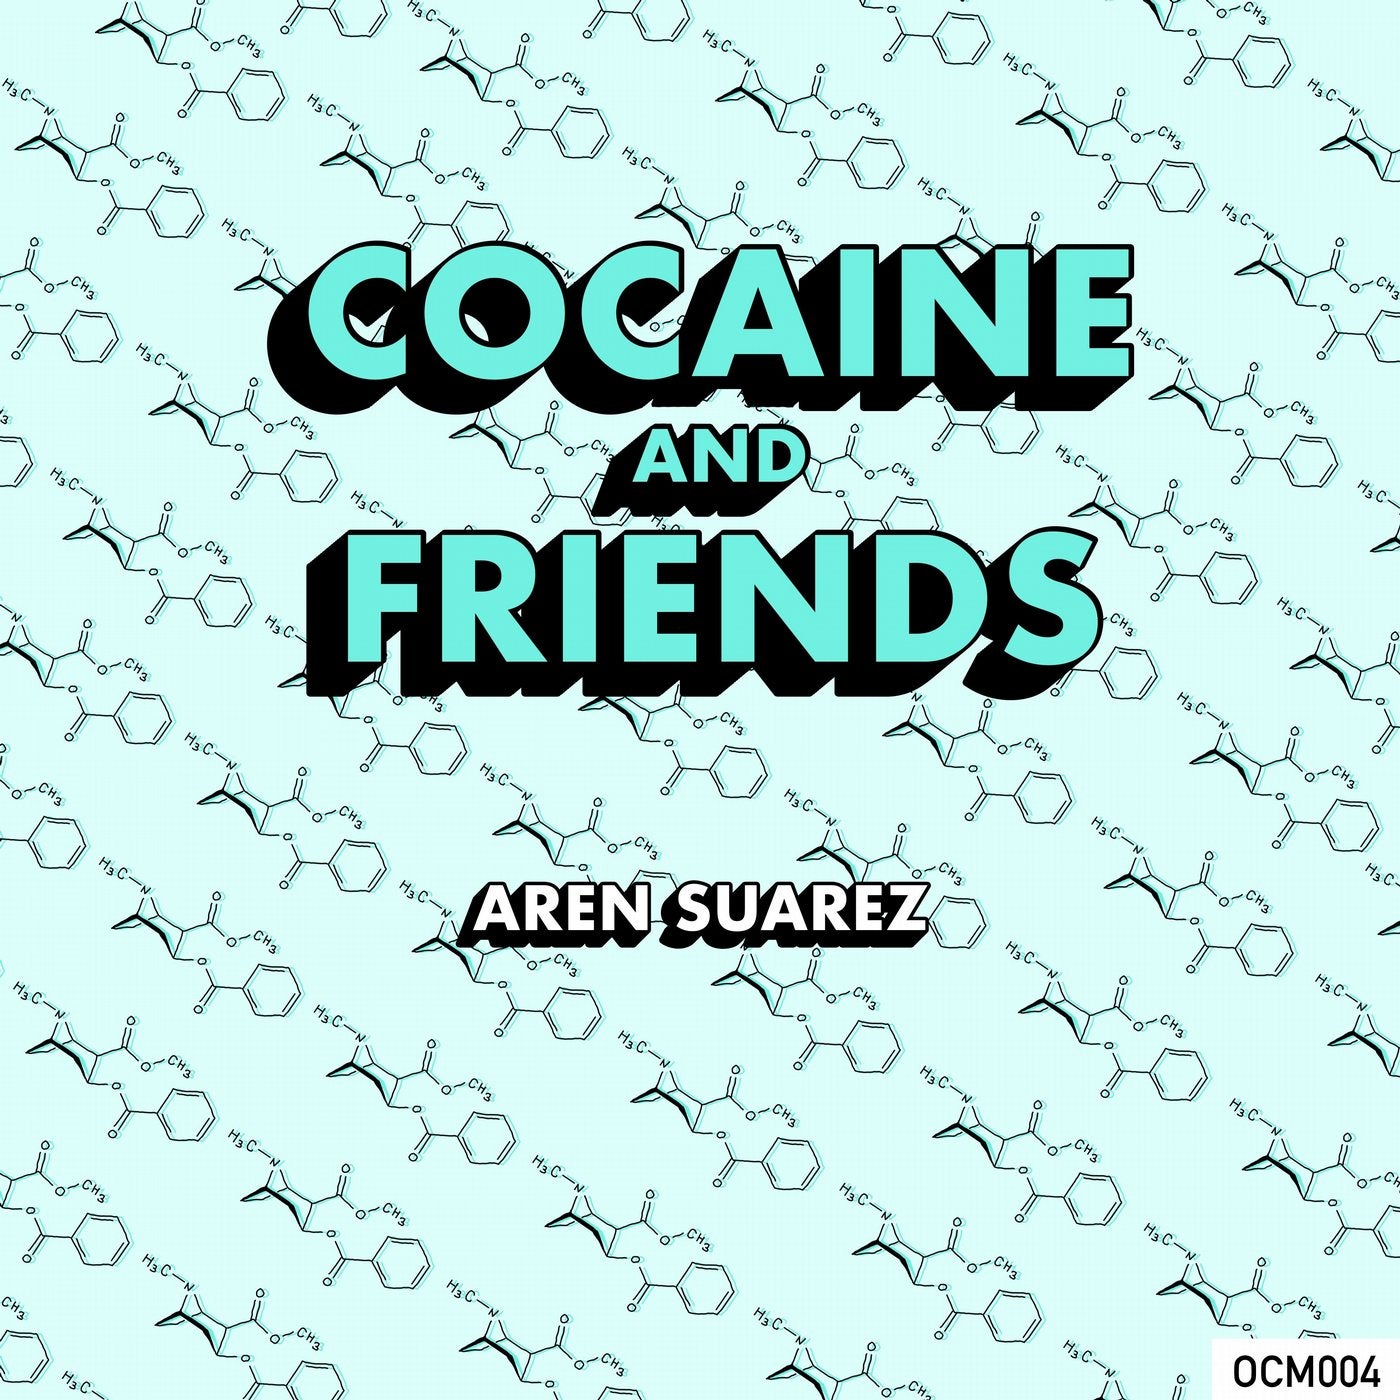 Cocaine and Friends